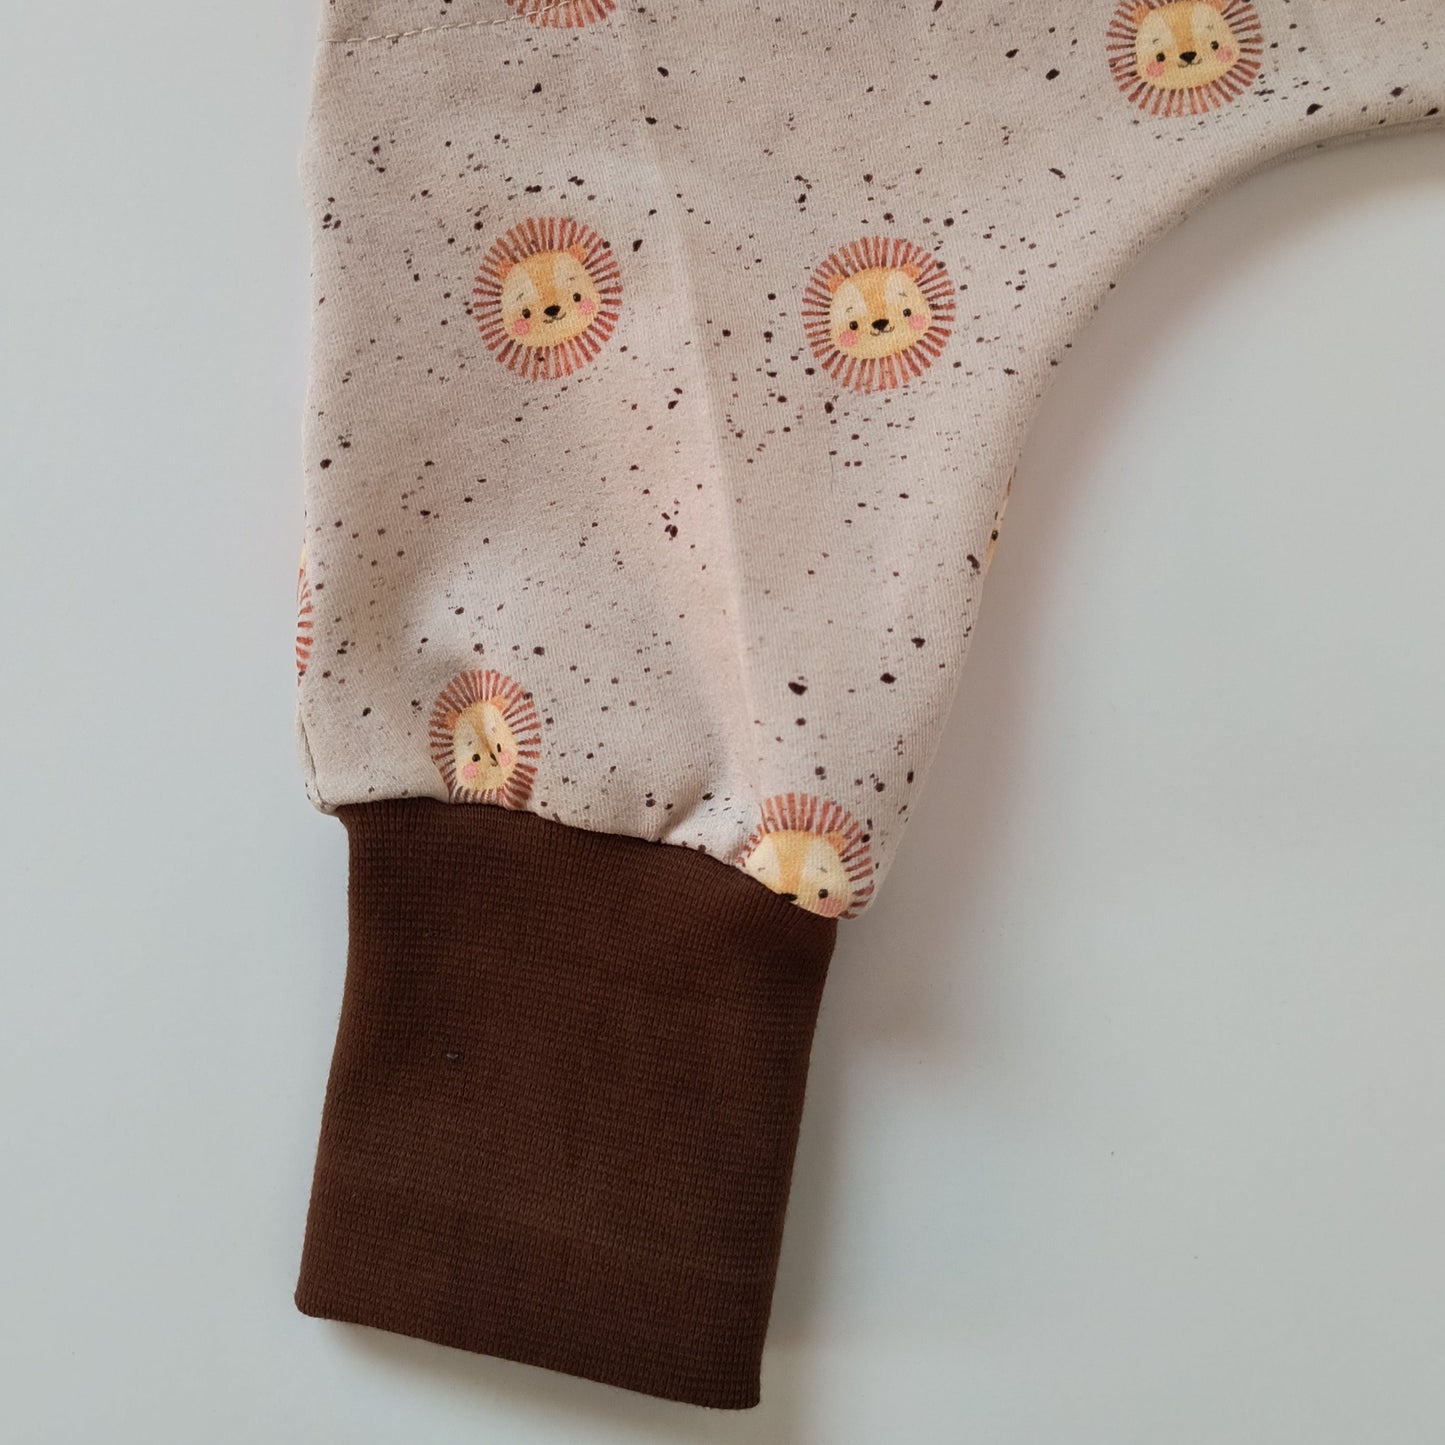 Toddler sweat pants "grow with me", leo print, size EUR 92-98 cm / US 18-36 months (Handmade in Canada)